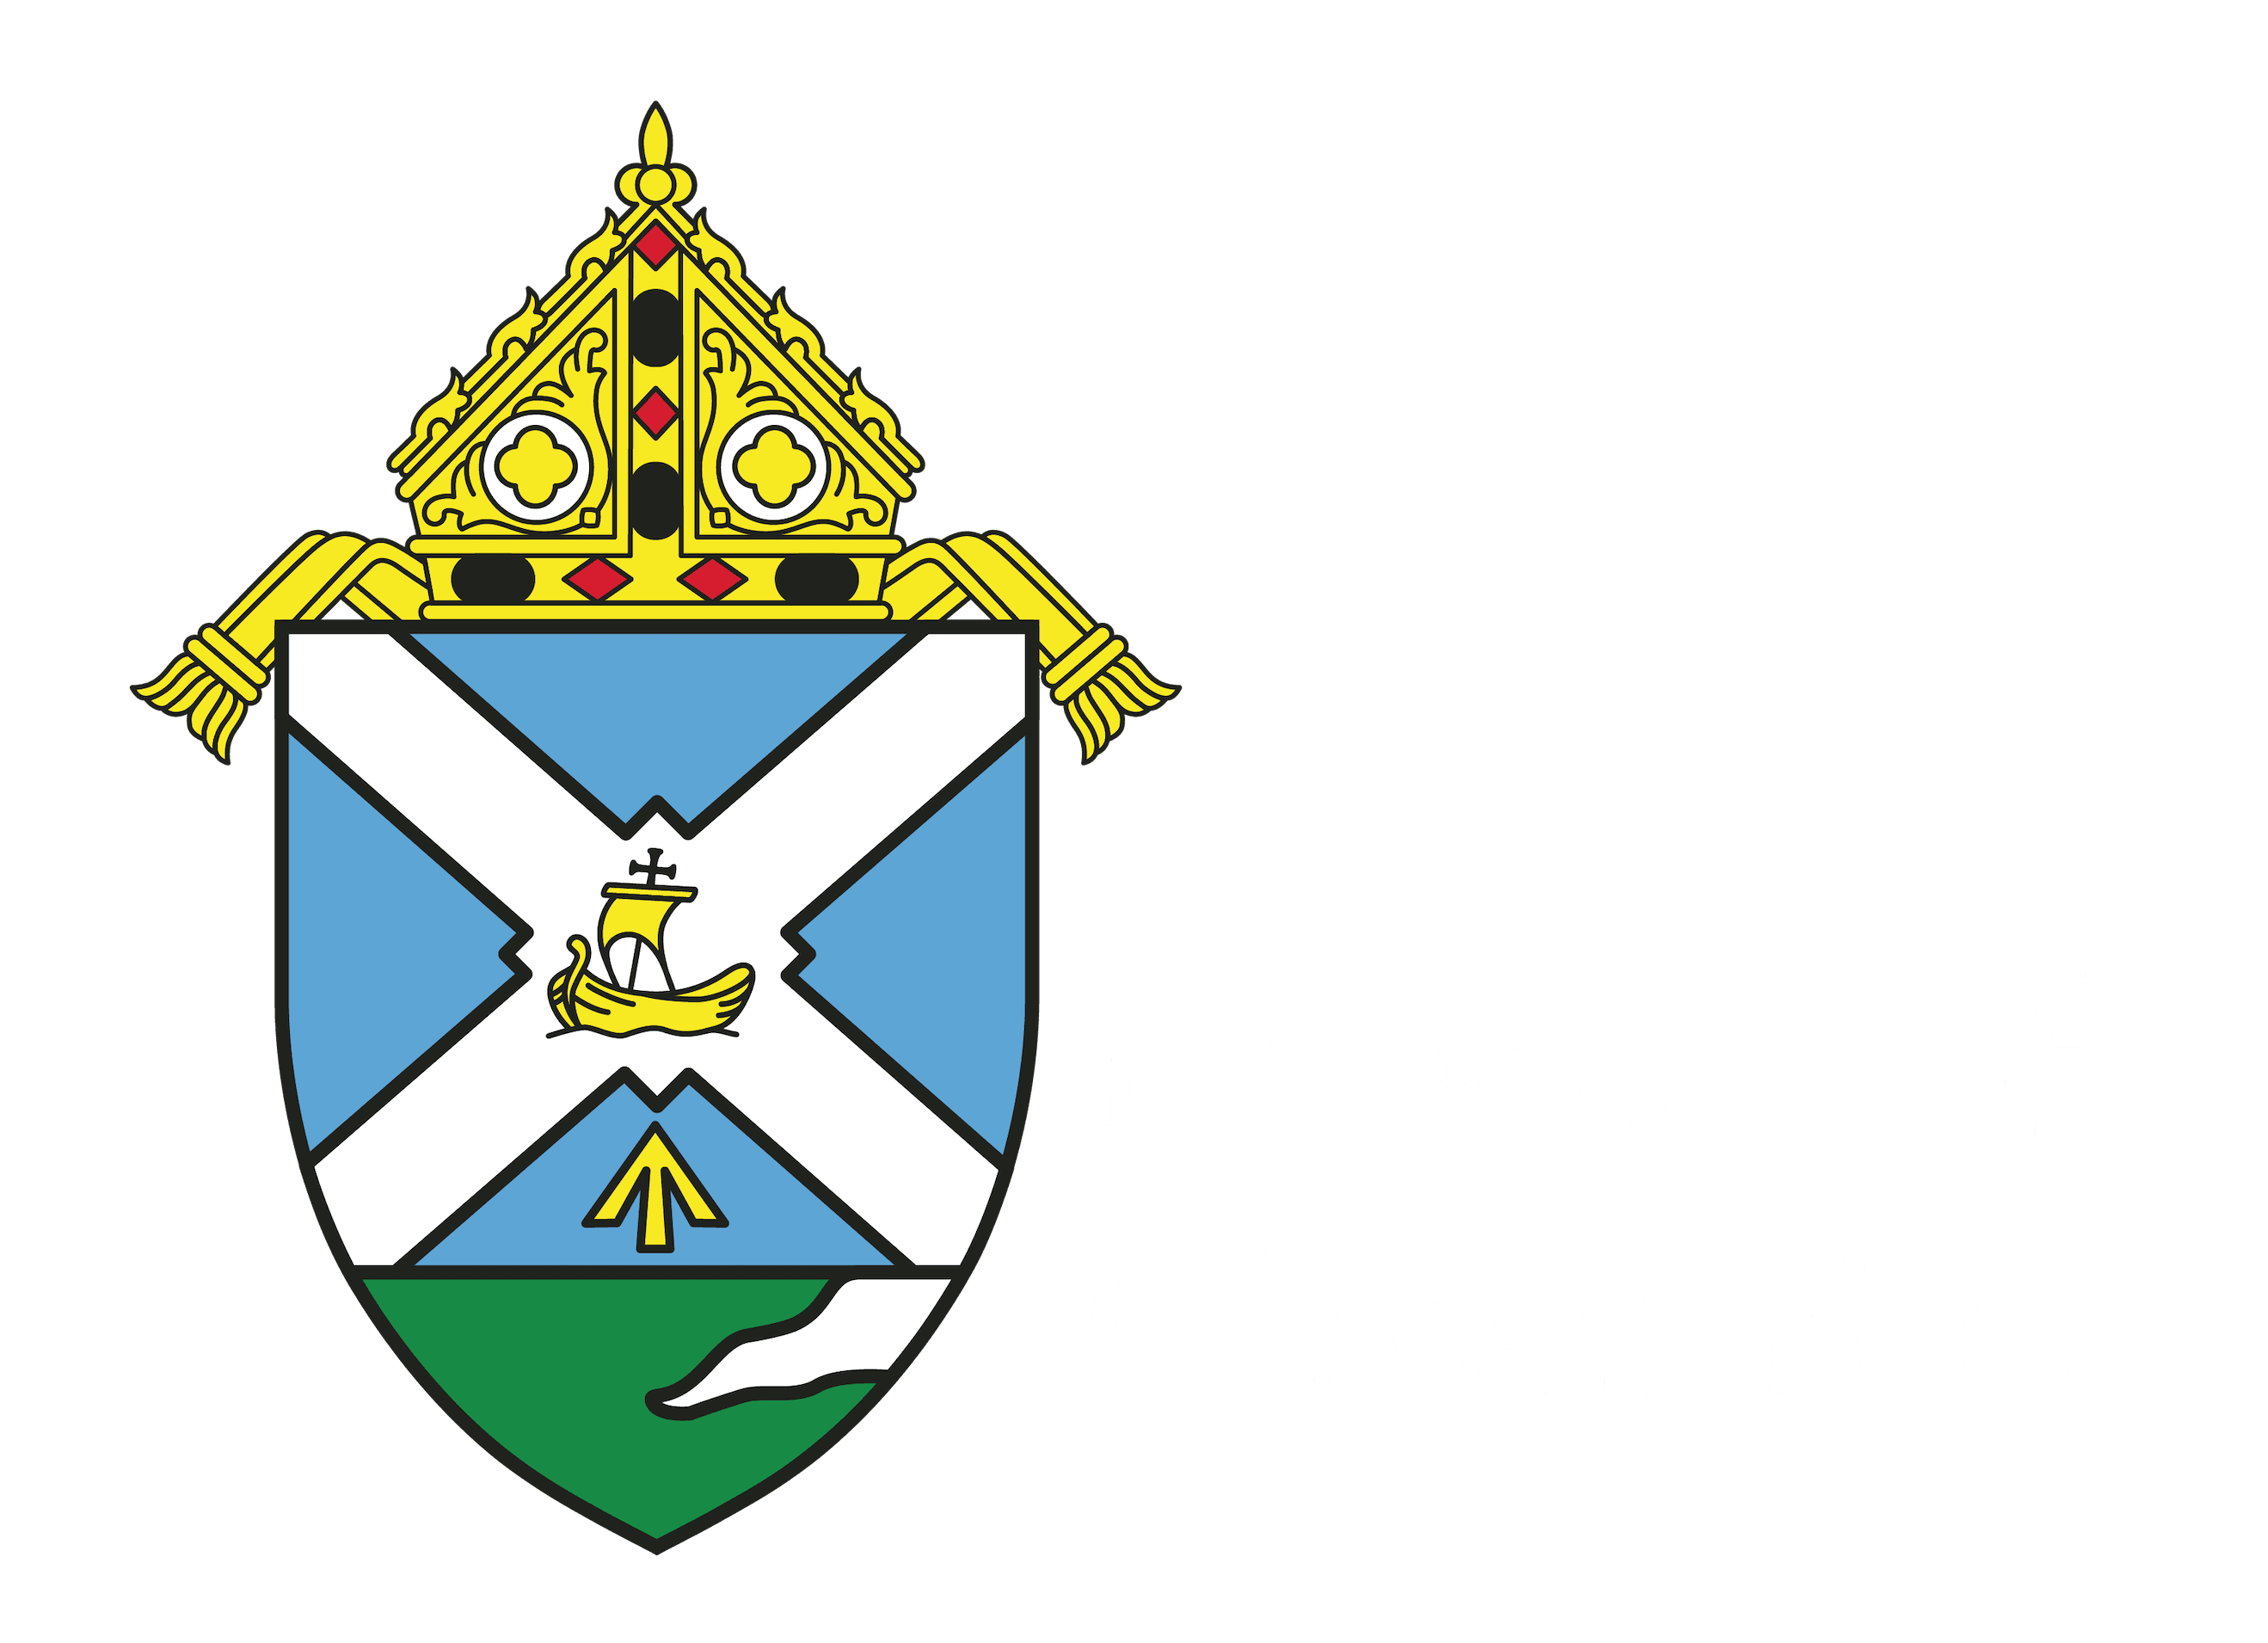 Diocese of Green Bay